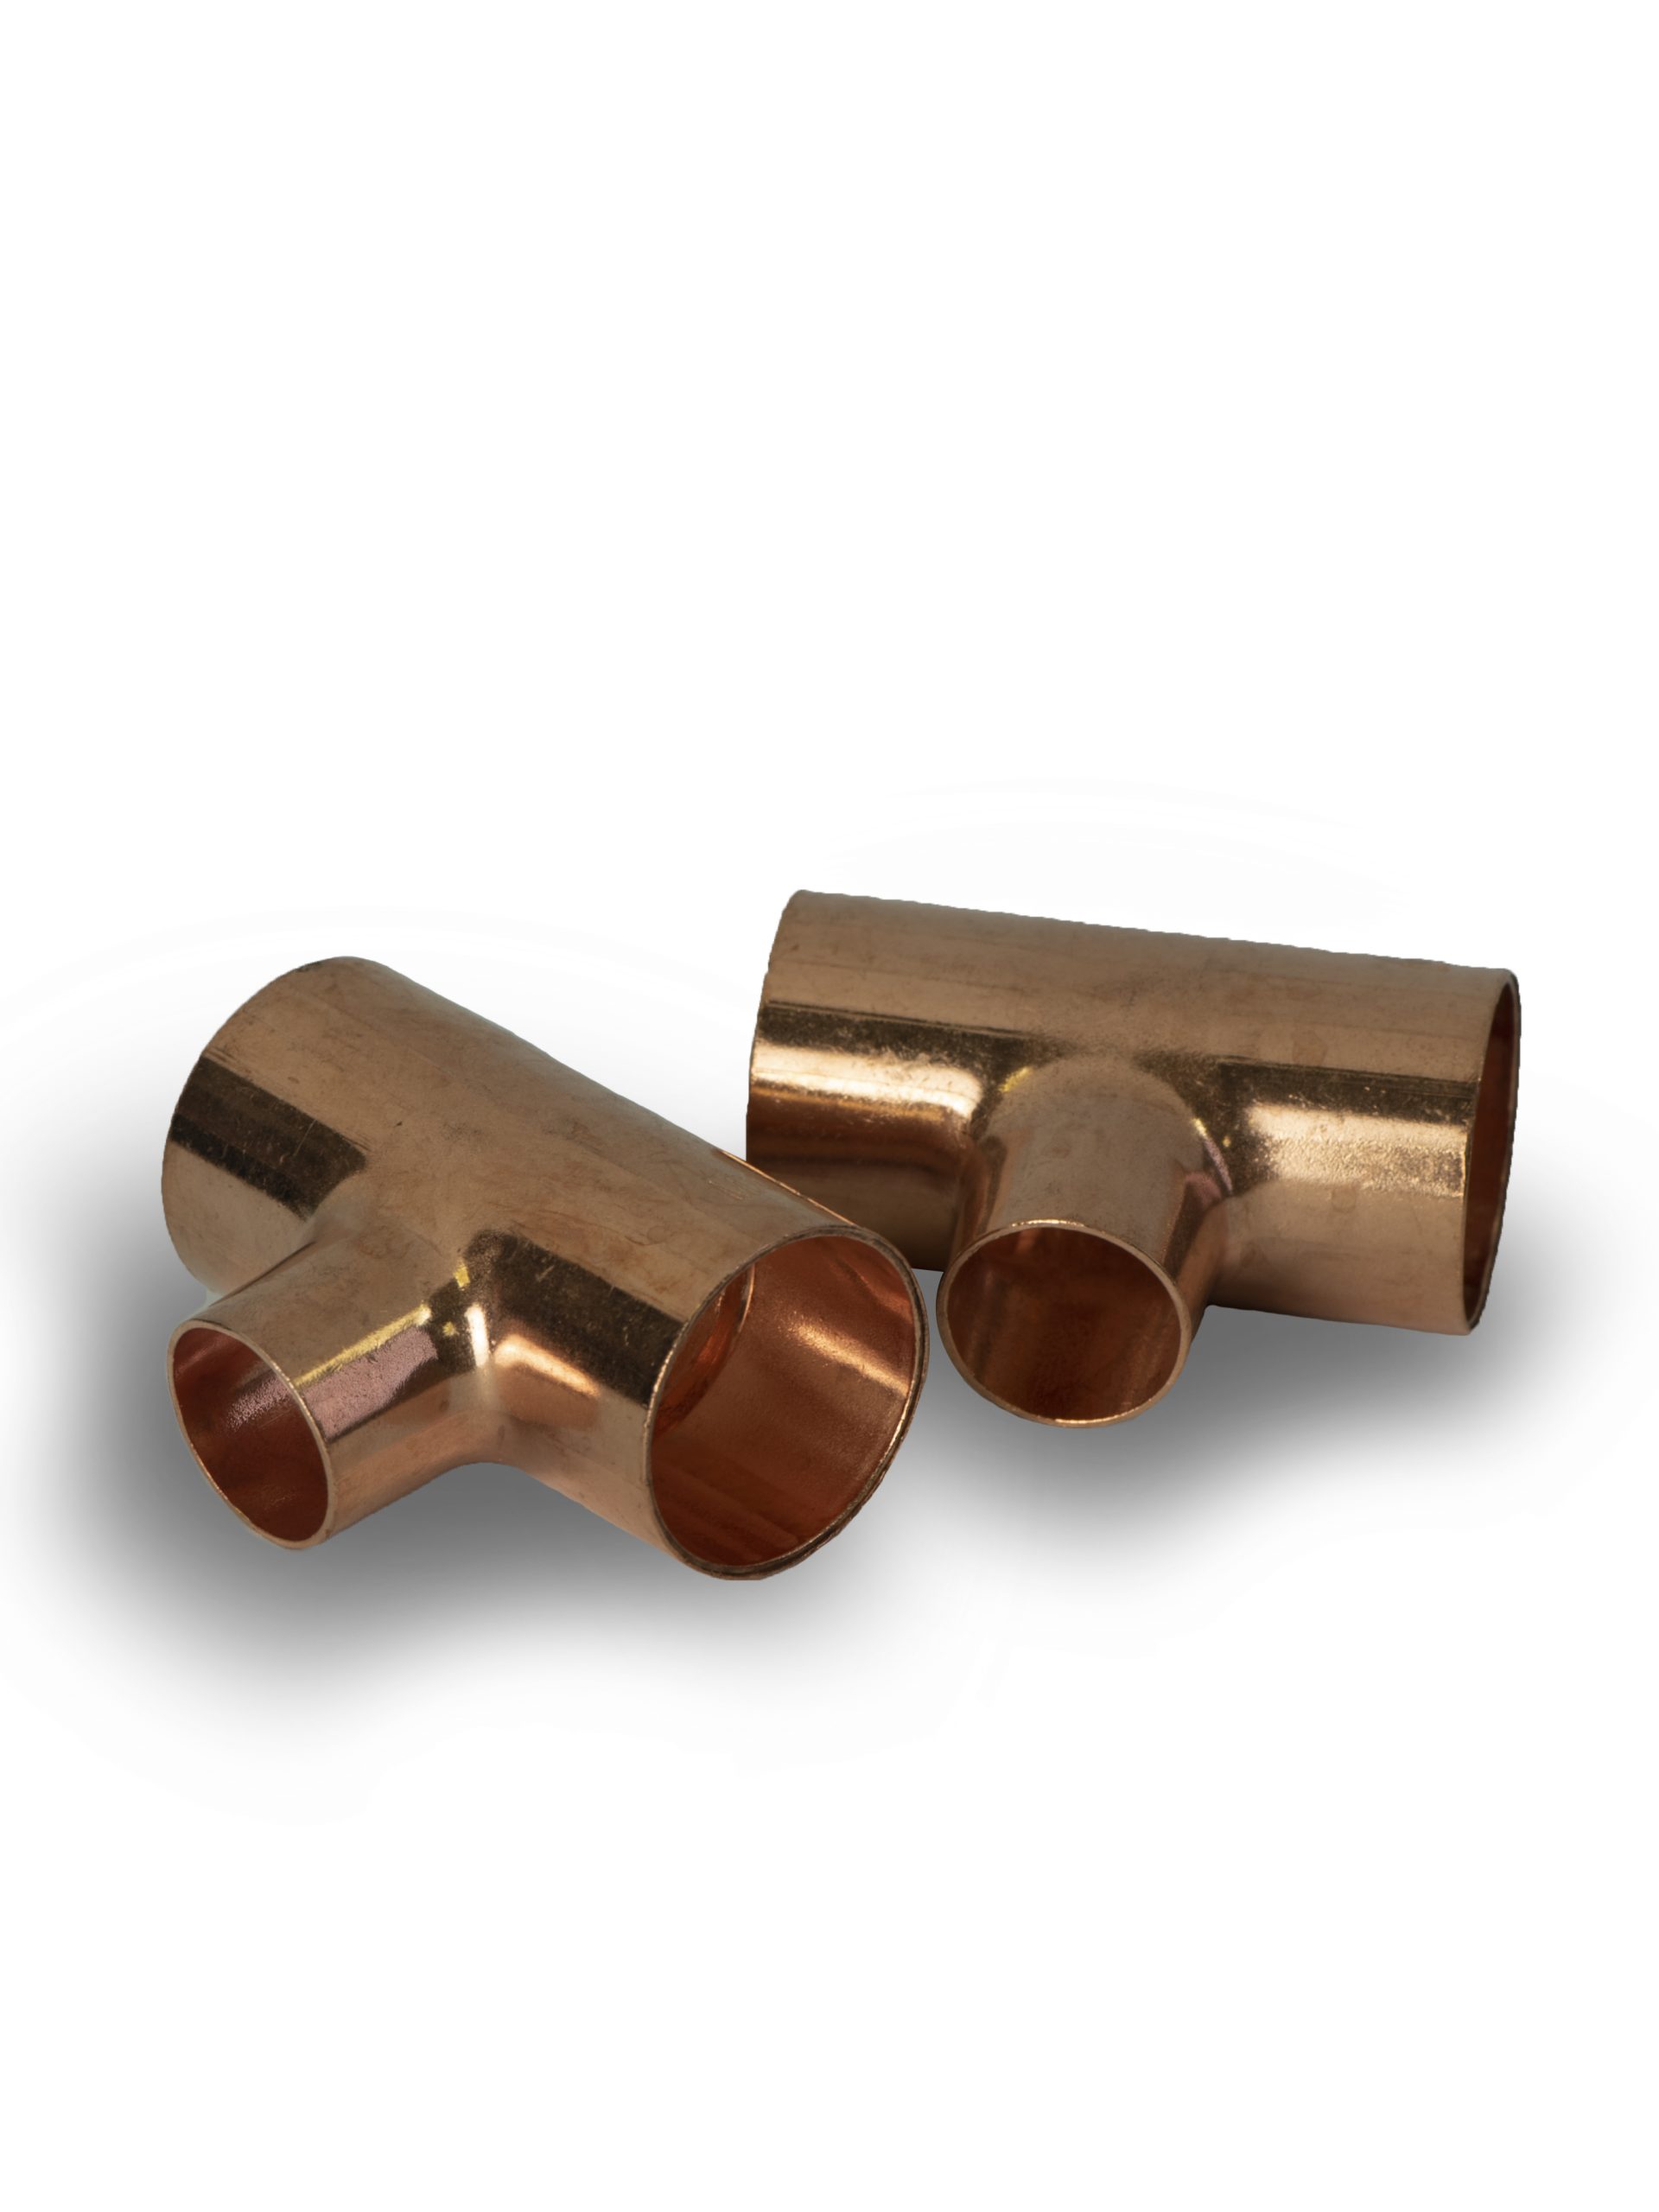 COPPER TEE REDUCER 22x15x12 MM, COMAP-CLESSE from Gas Equipment Company Llc Abu Dhabi, UNITED ARAB EMIRATES